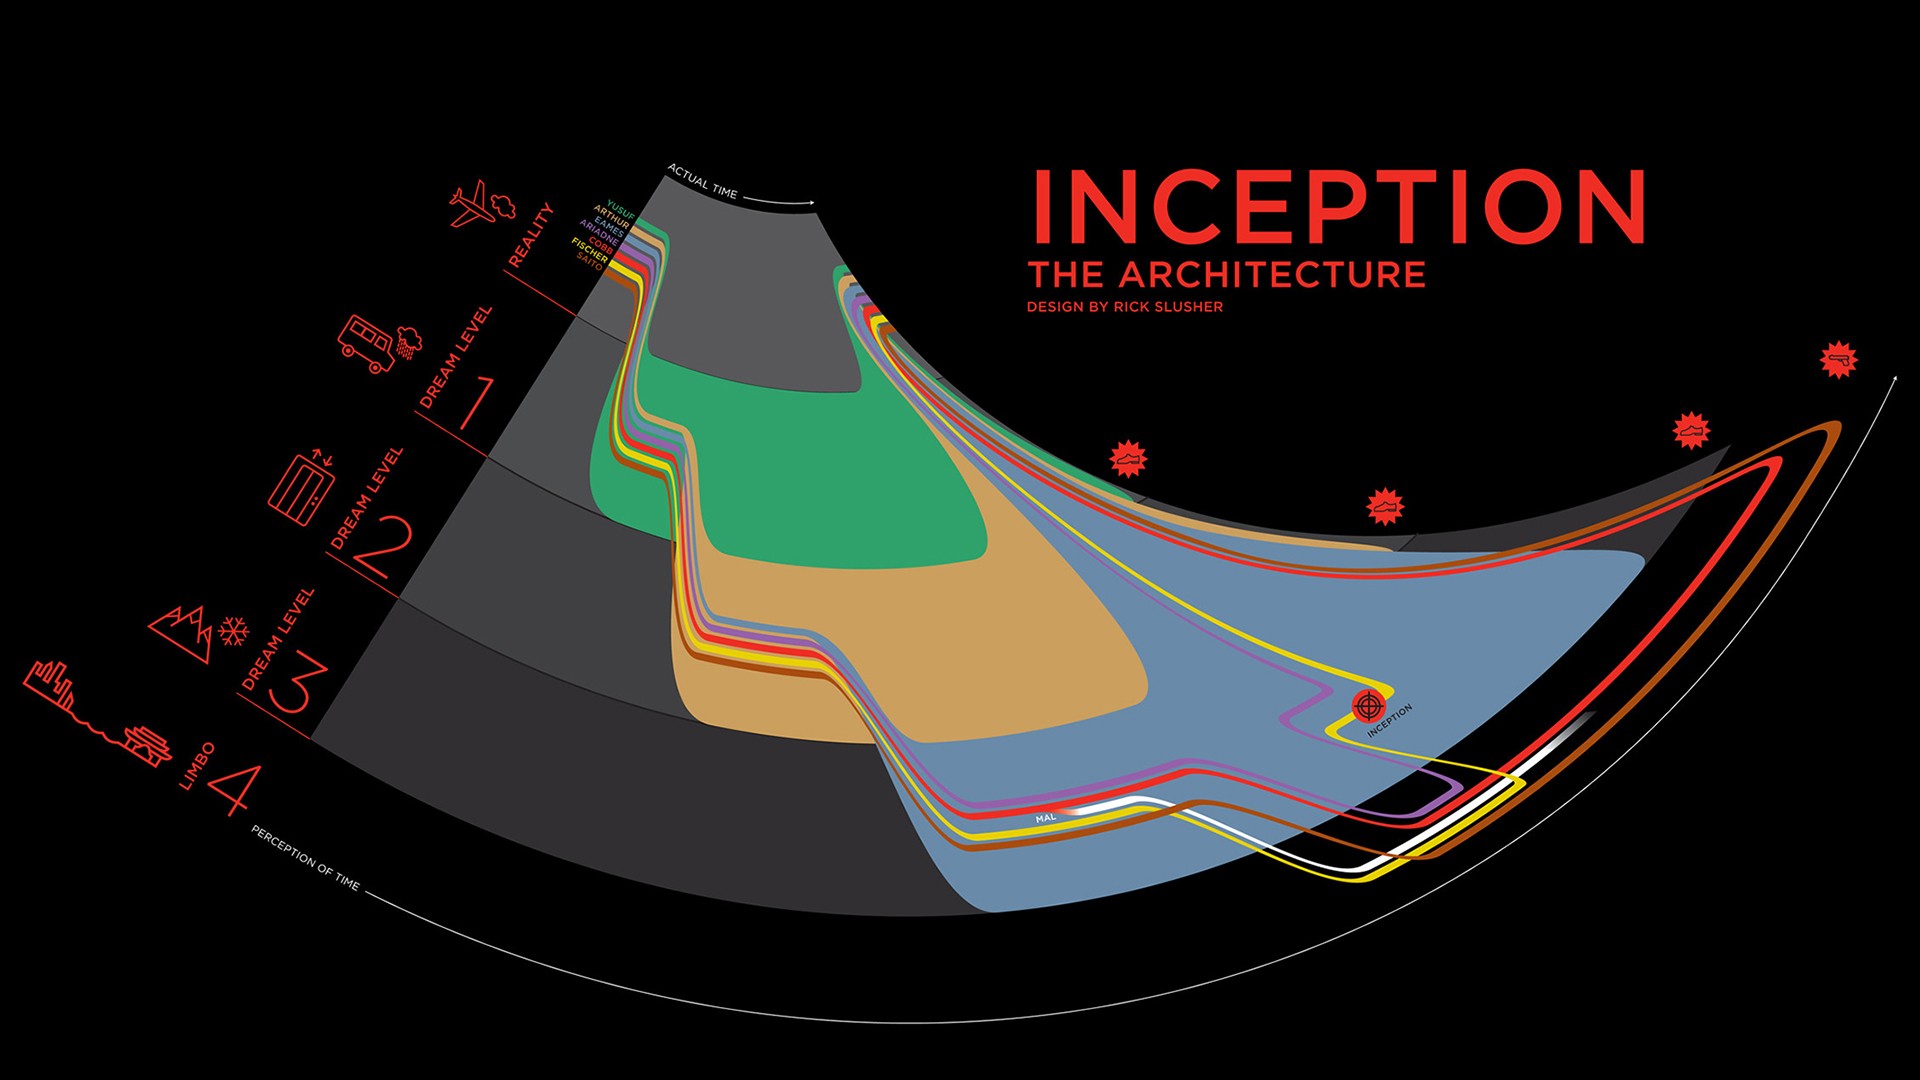 Download the Inception Architecture Wallpaper, Inception